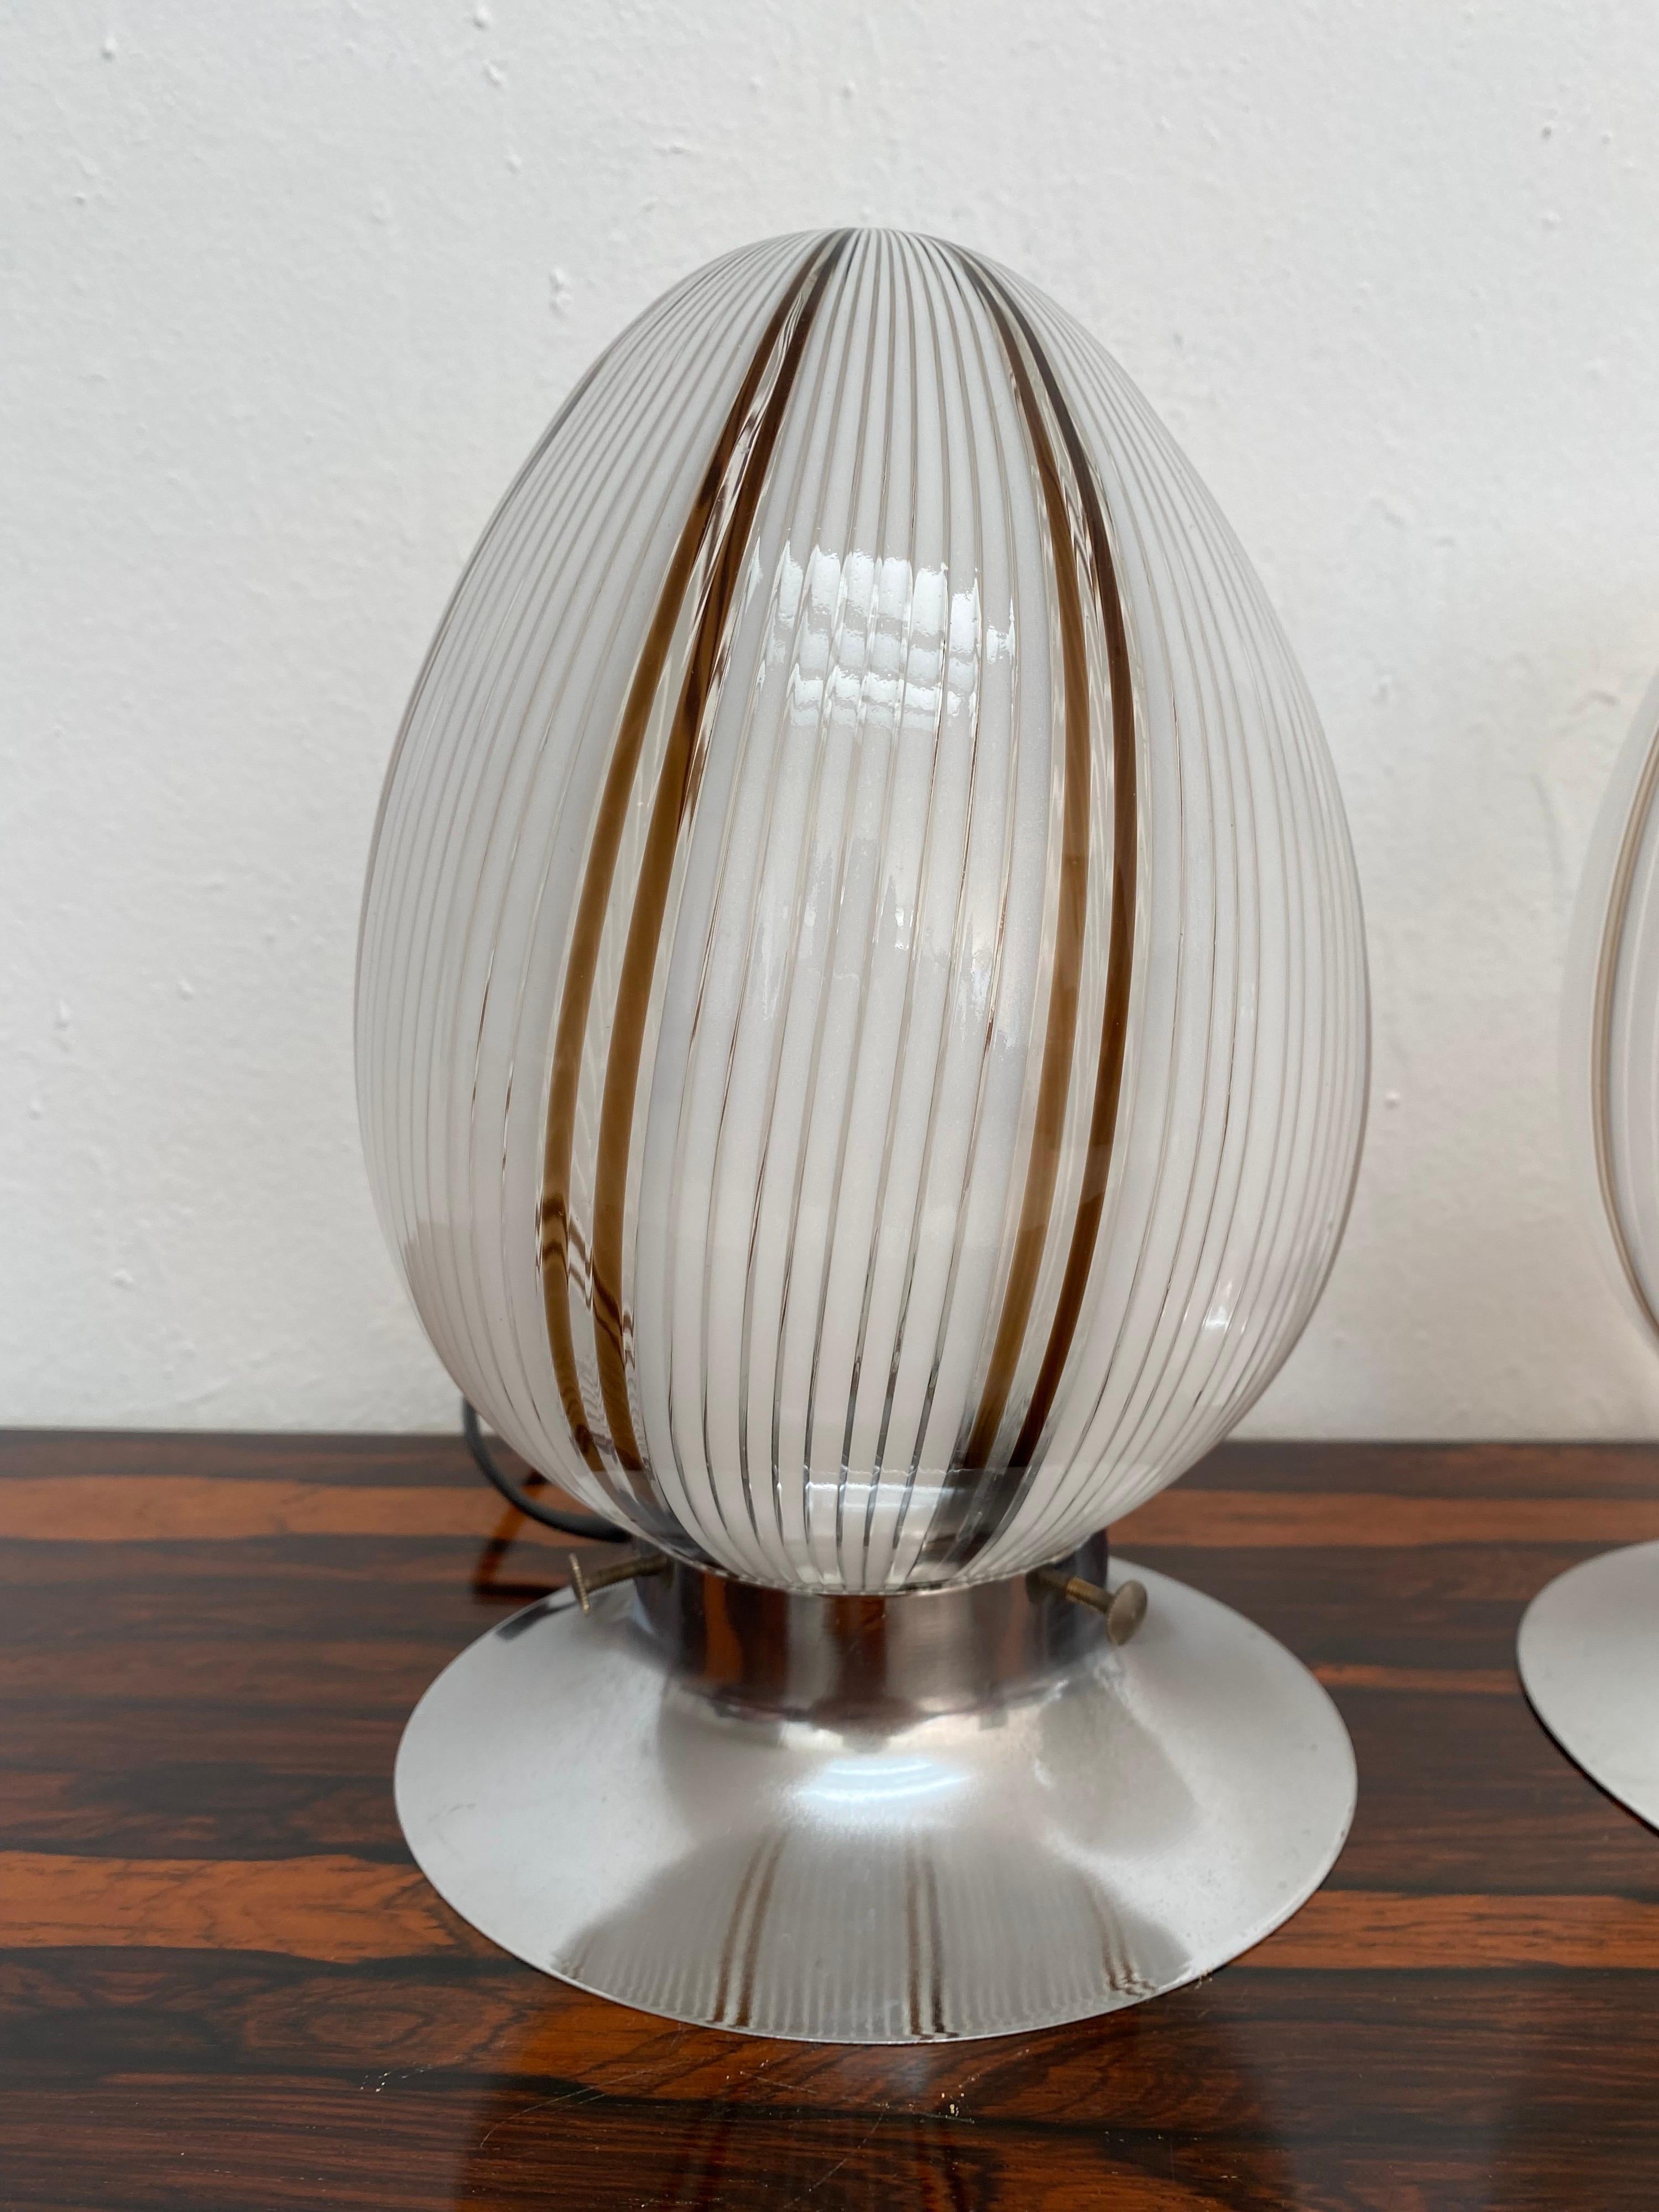 Italian Pair of Mid-Century Modern Table Lamps Attributed to Venini, Murano, circa 1980 For Sale